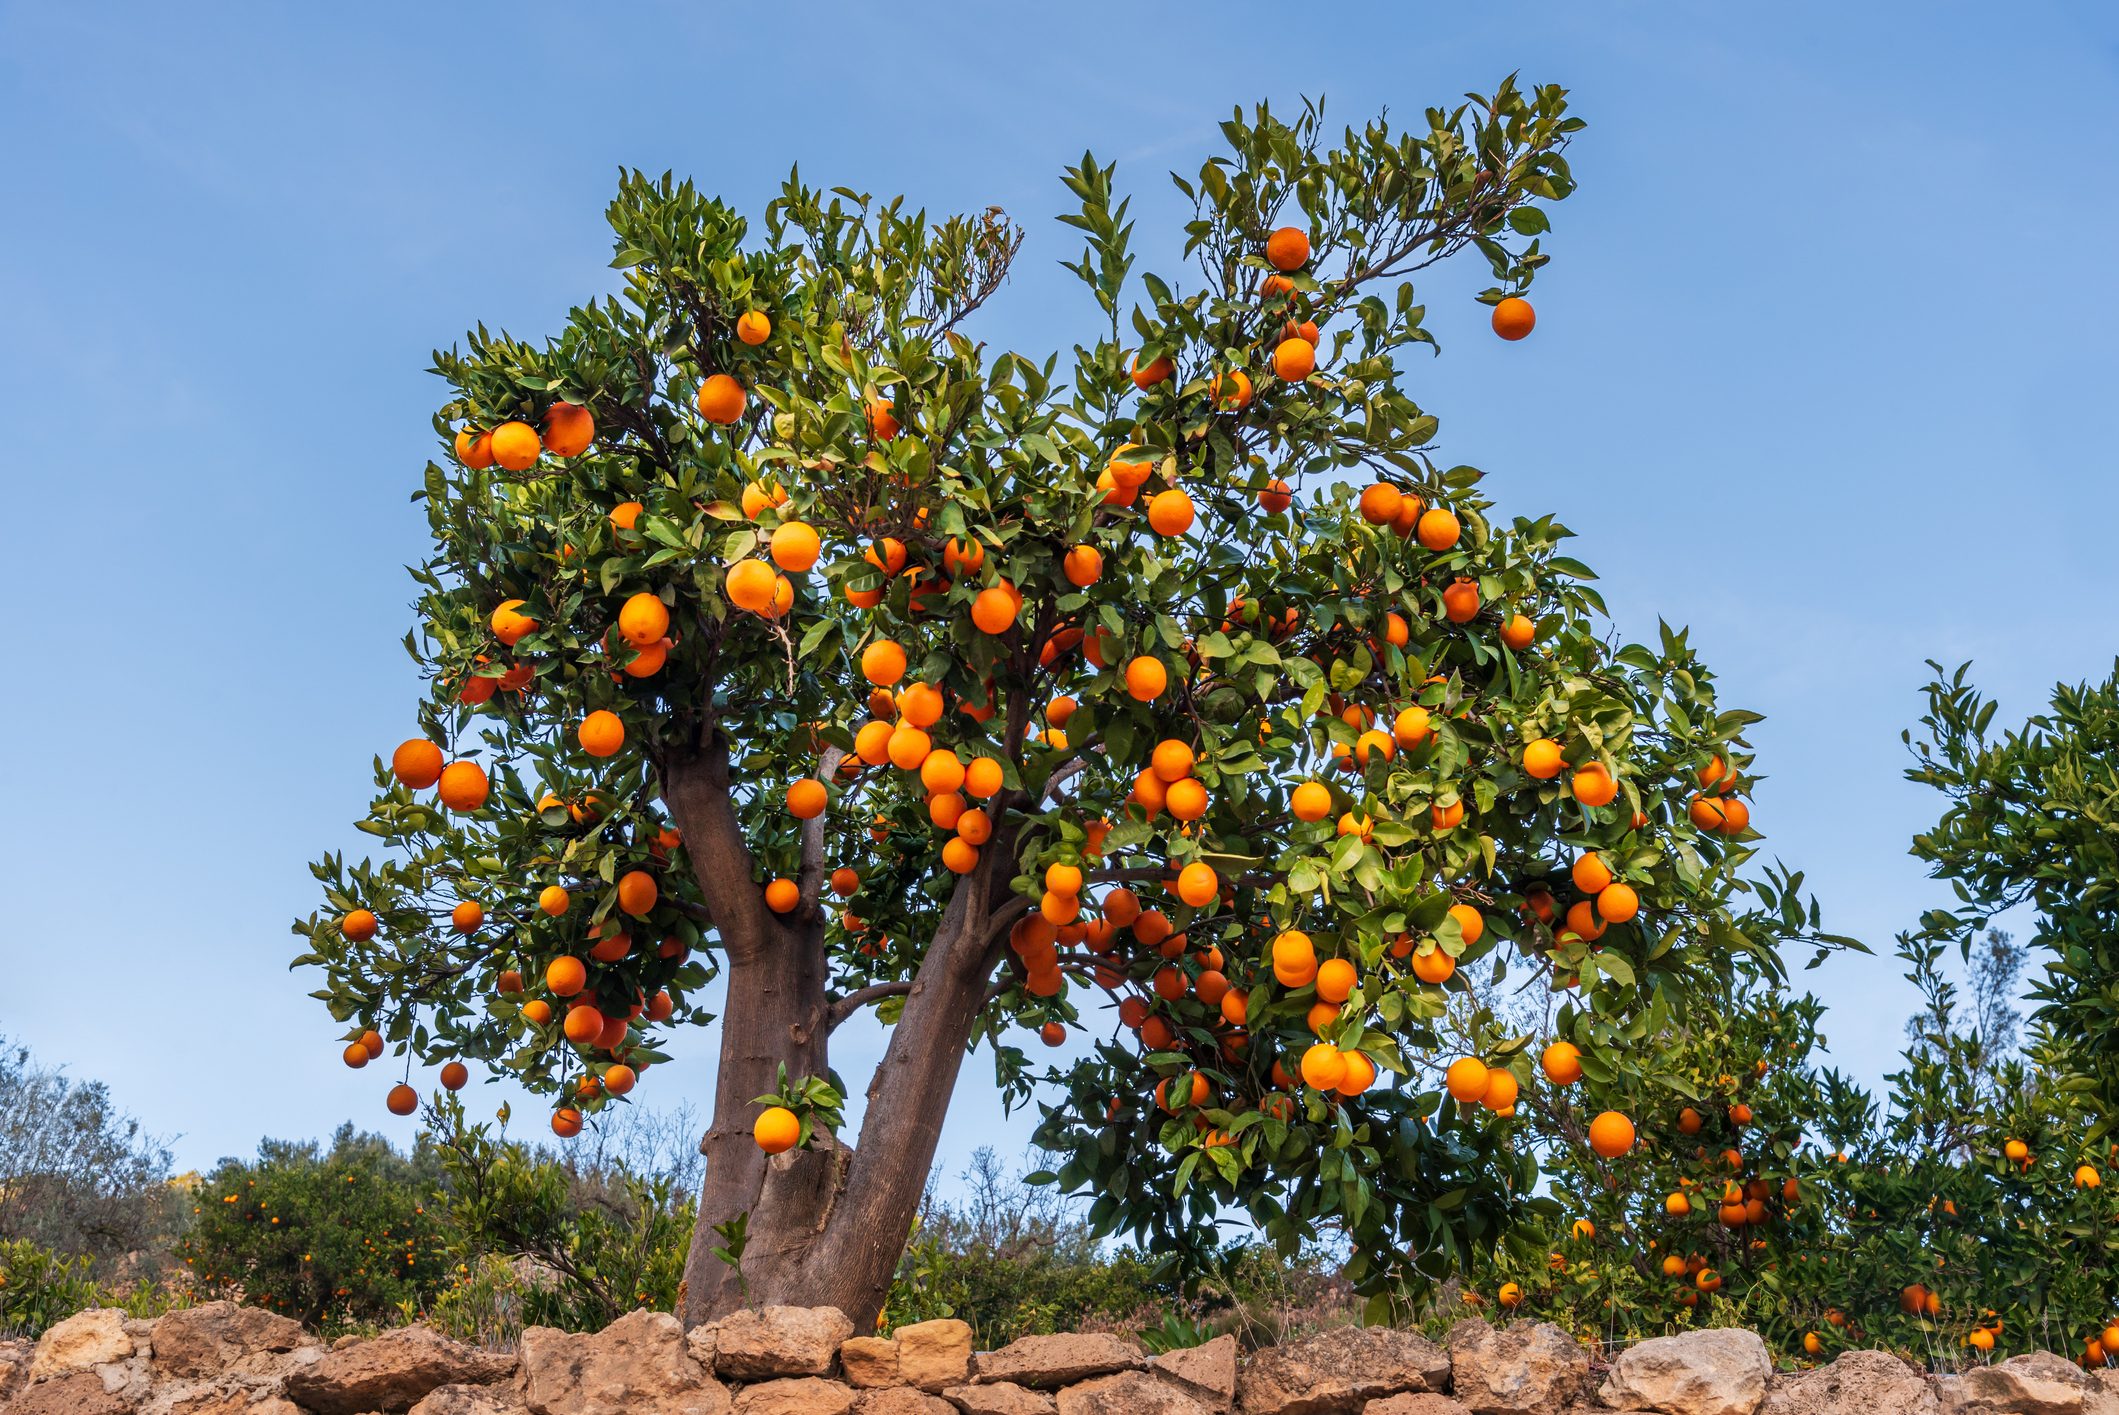 12 Best Types of Fruit Trees To Grow in Your Backyard